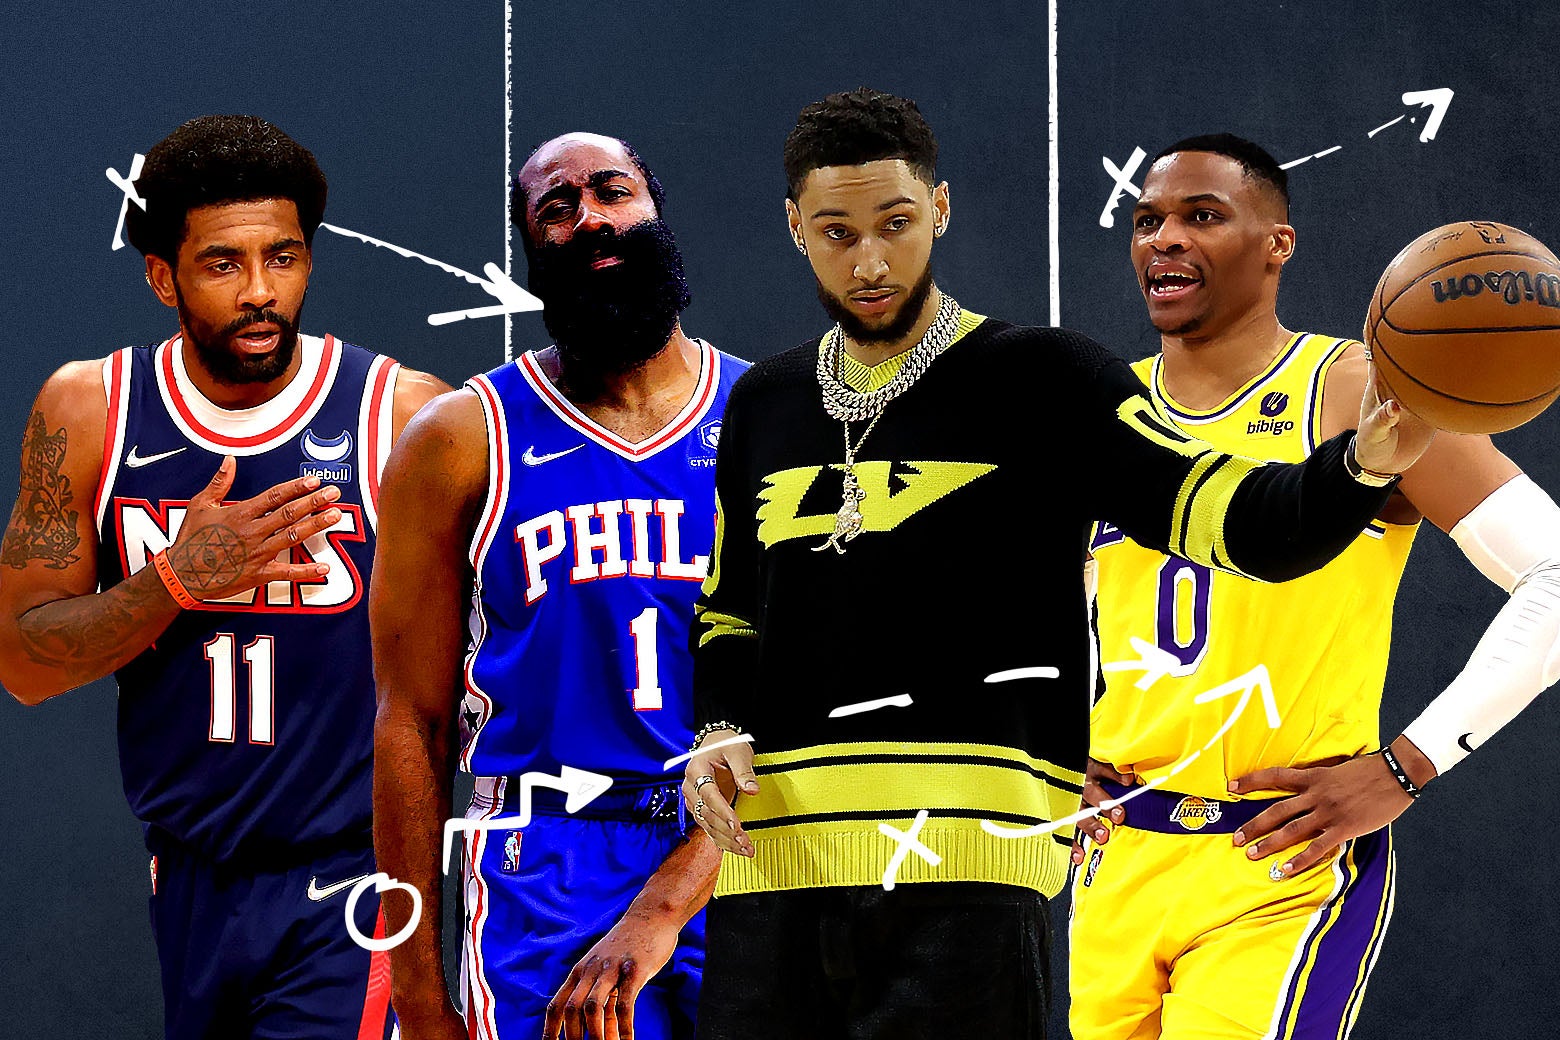 Kyrie Irving, James Harden, Ben Simmons, and Russell Westbrook.